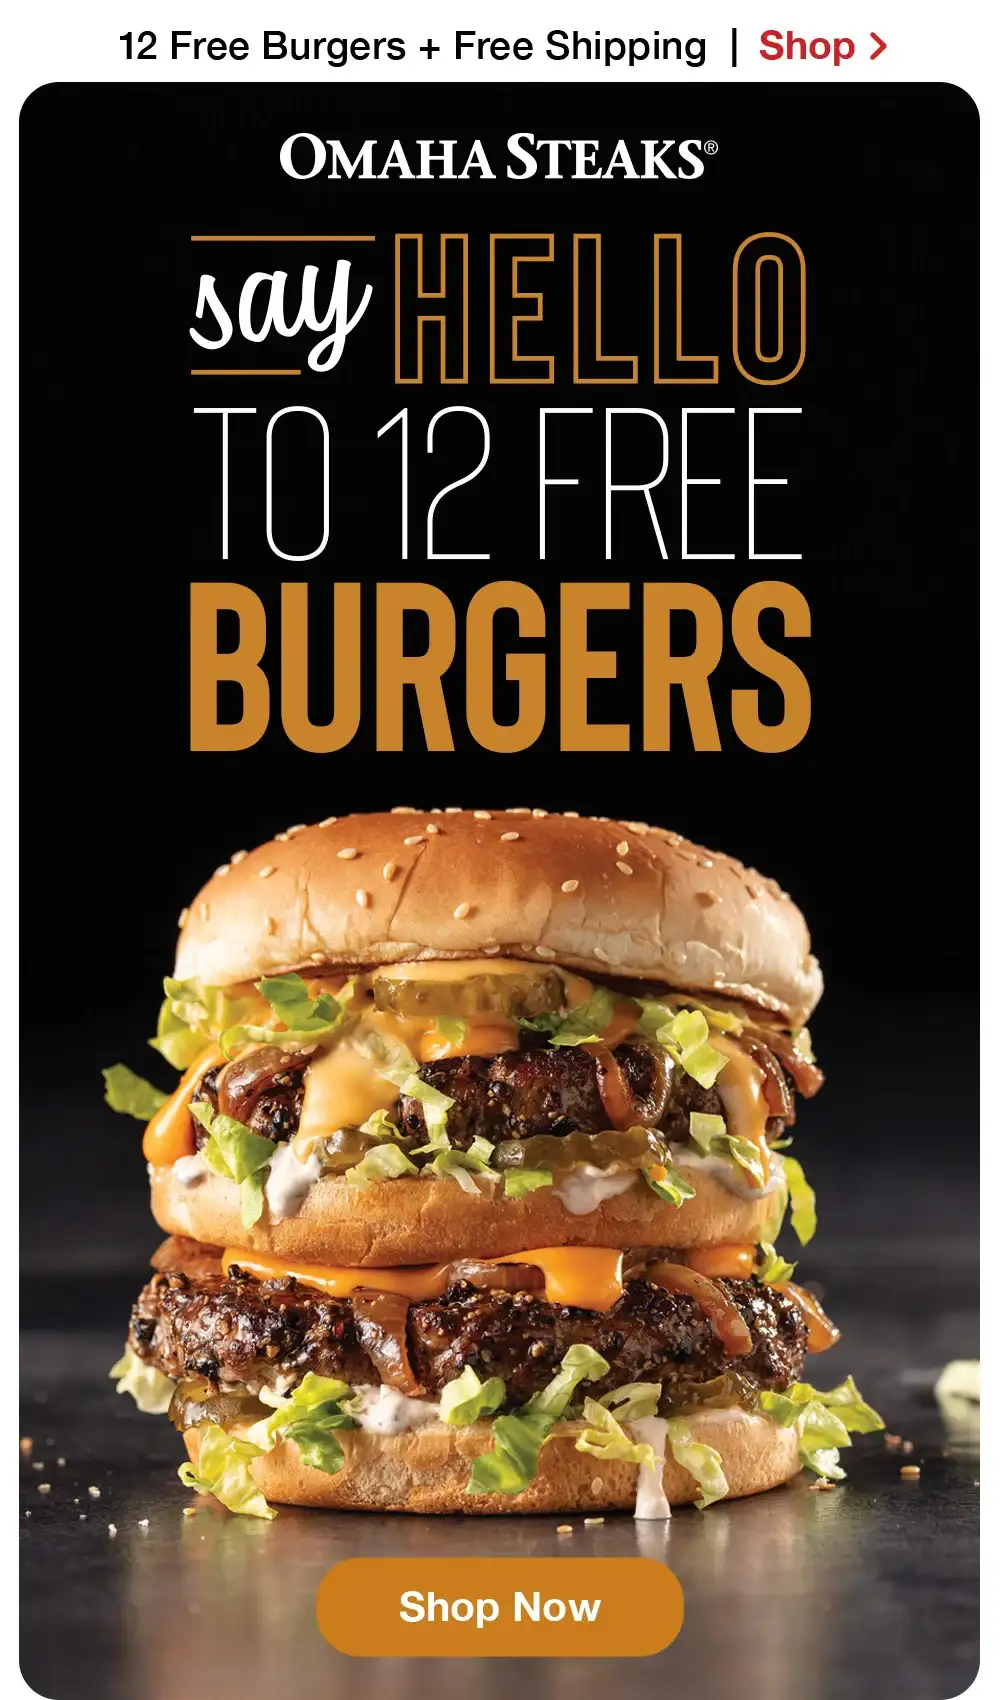 12 free burgers + Free Shipping | SAY HELLO TO ALL-NEW BURGERS | A \\$44 VALUE! | SHOP NOW